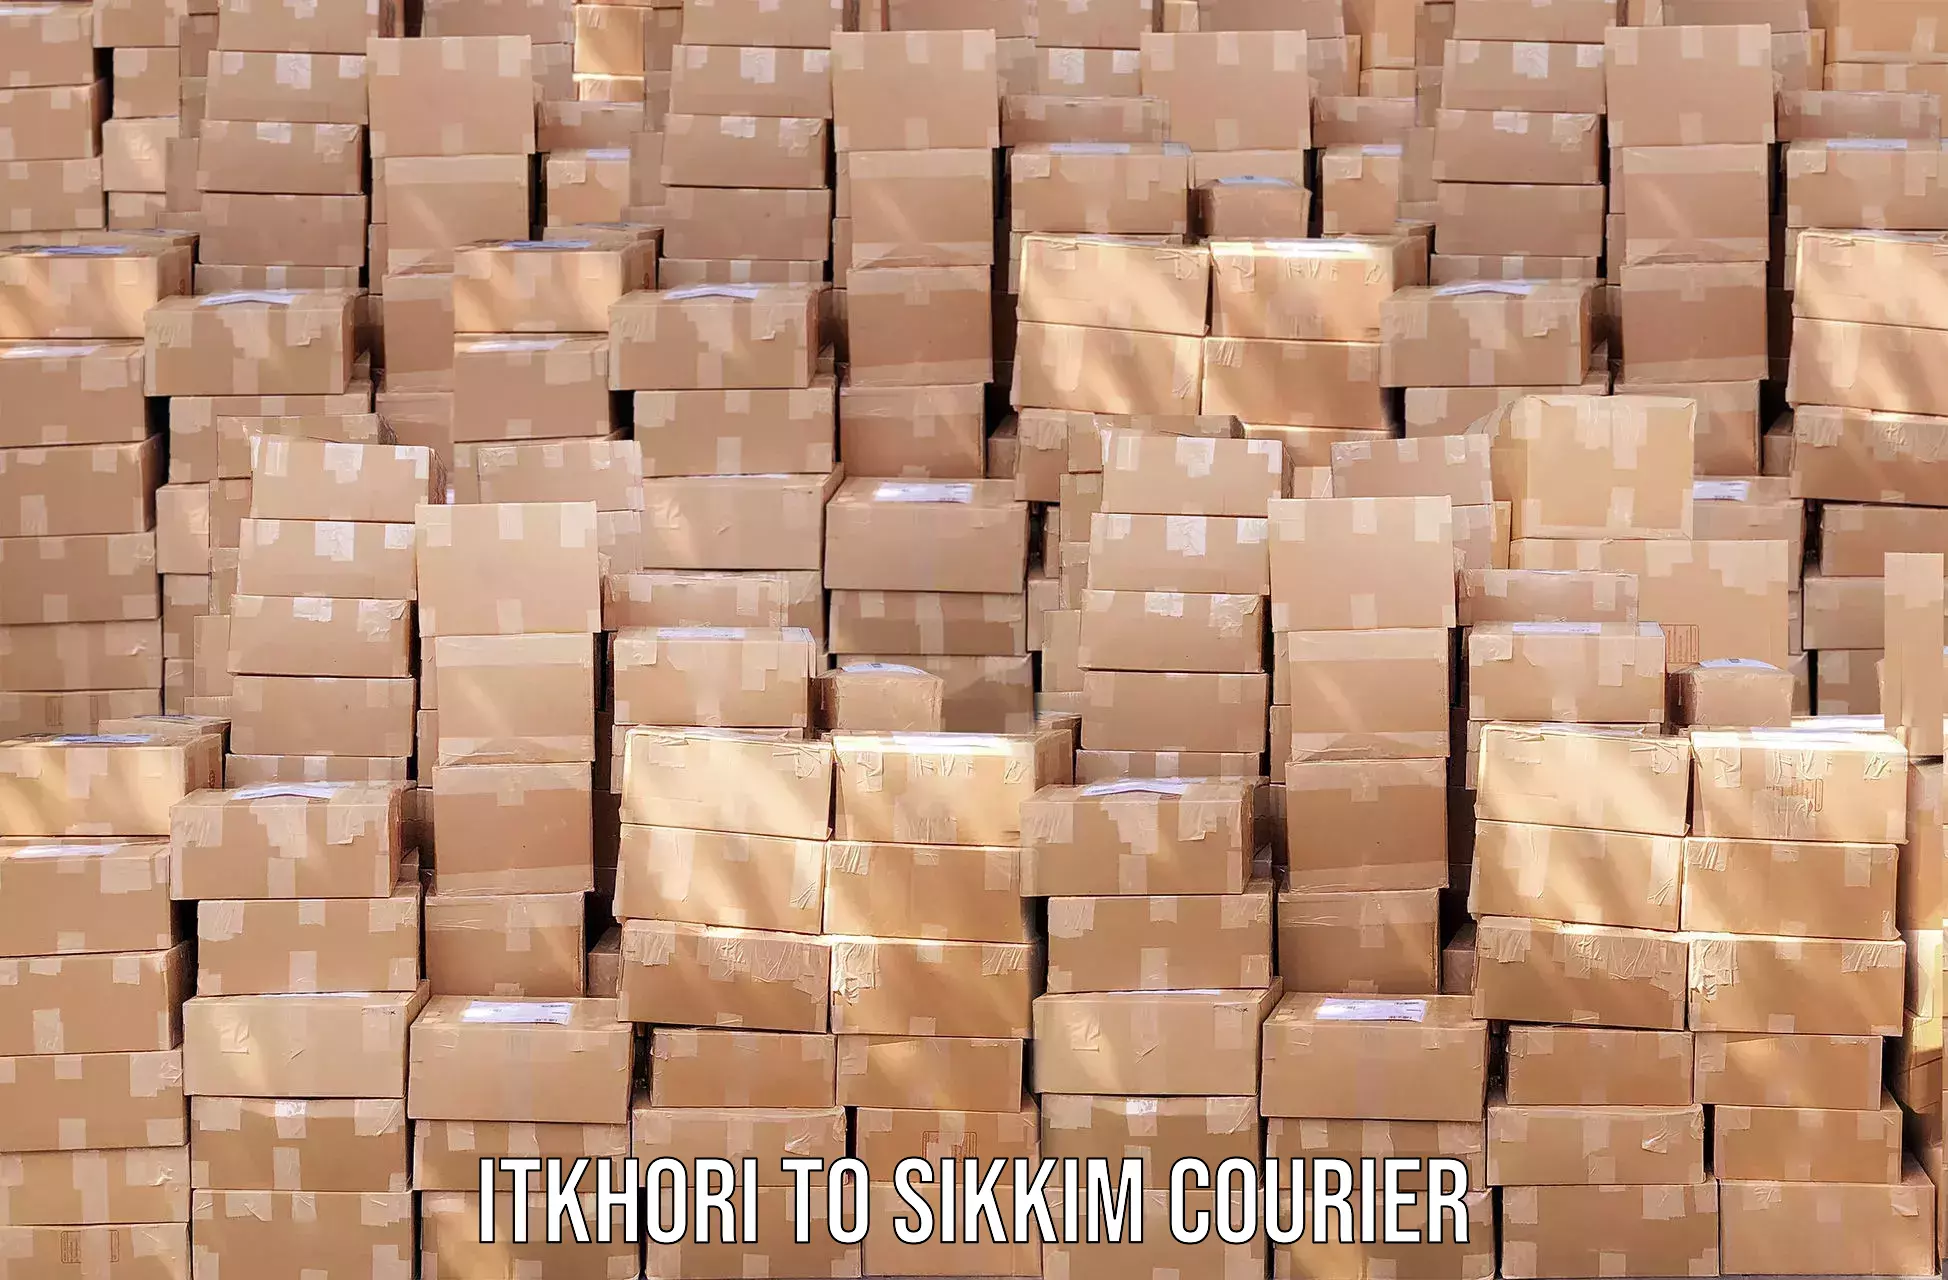 Courier app Itkhori to East Sikkim